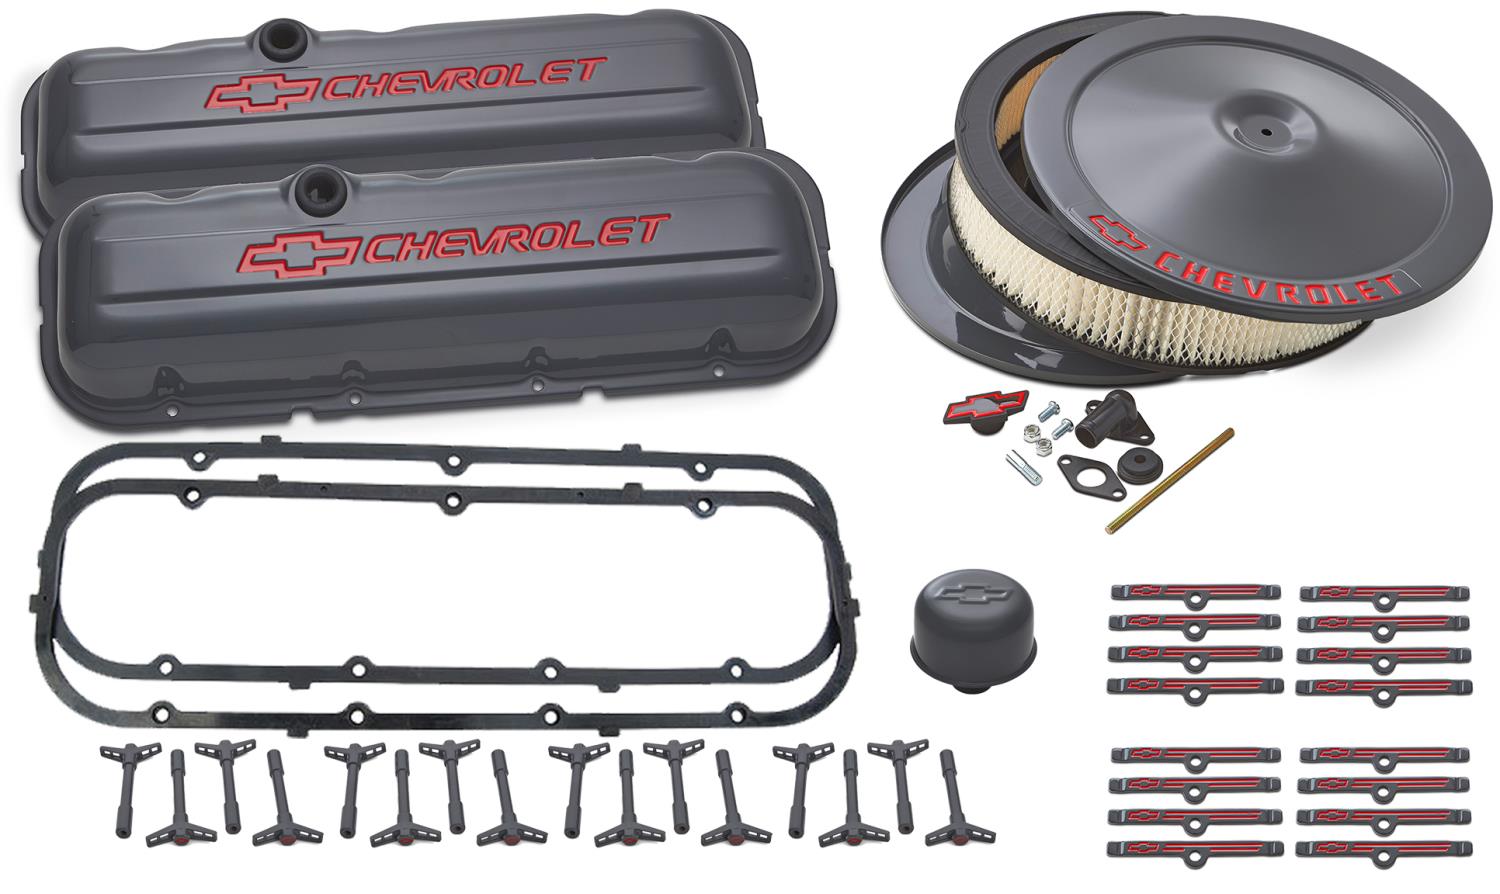 Stamped Steel Tall Valve Cover Dress-Up Kit for 1965-1996 Big Block Chevy in Shark Gray Finish